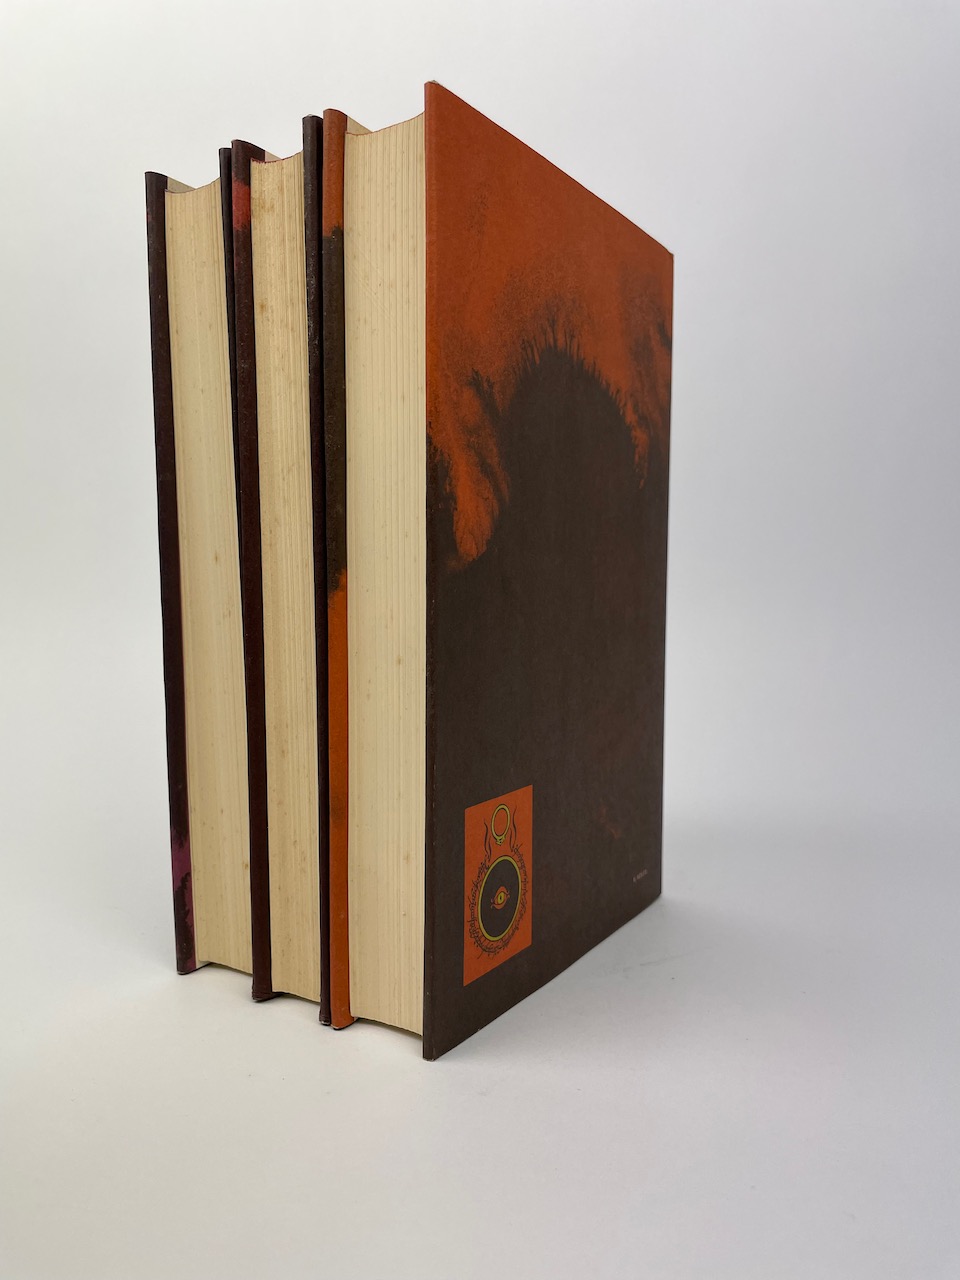 Lord of the Rings, 2nd US Edition in Original Publishers Slipcase and with Dustjackets 12